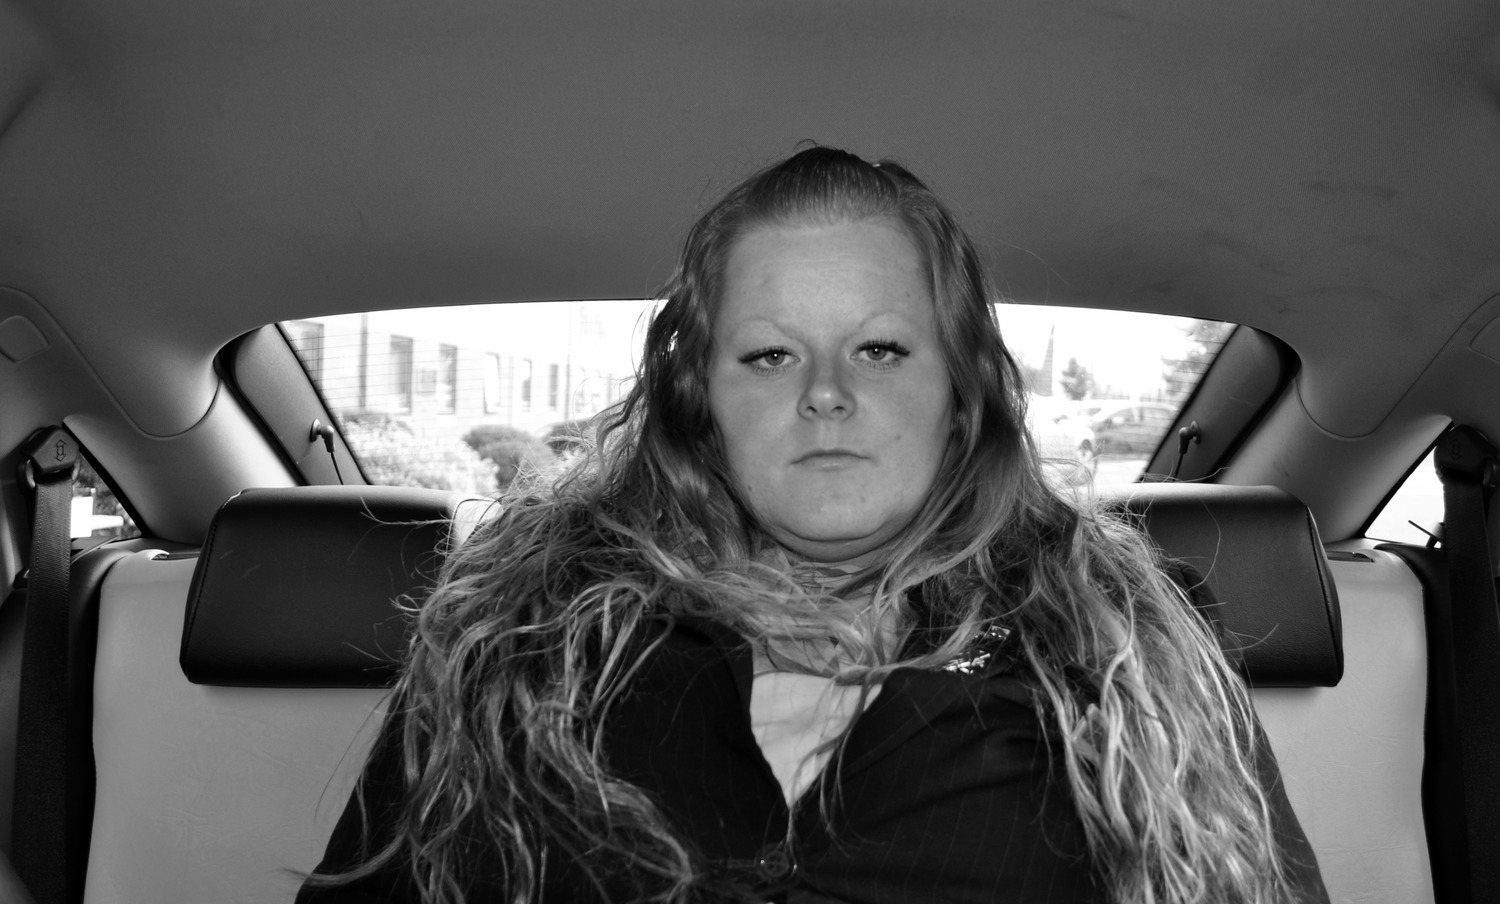 mike-harvey-south-wales-taxi-photos-101-body-image-1416400829